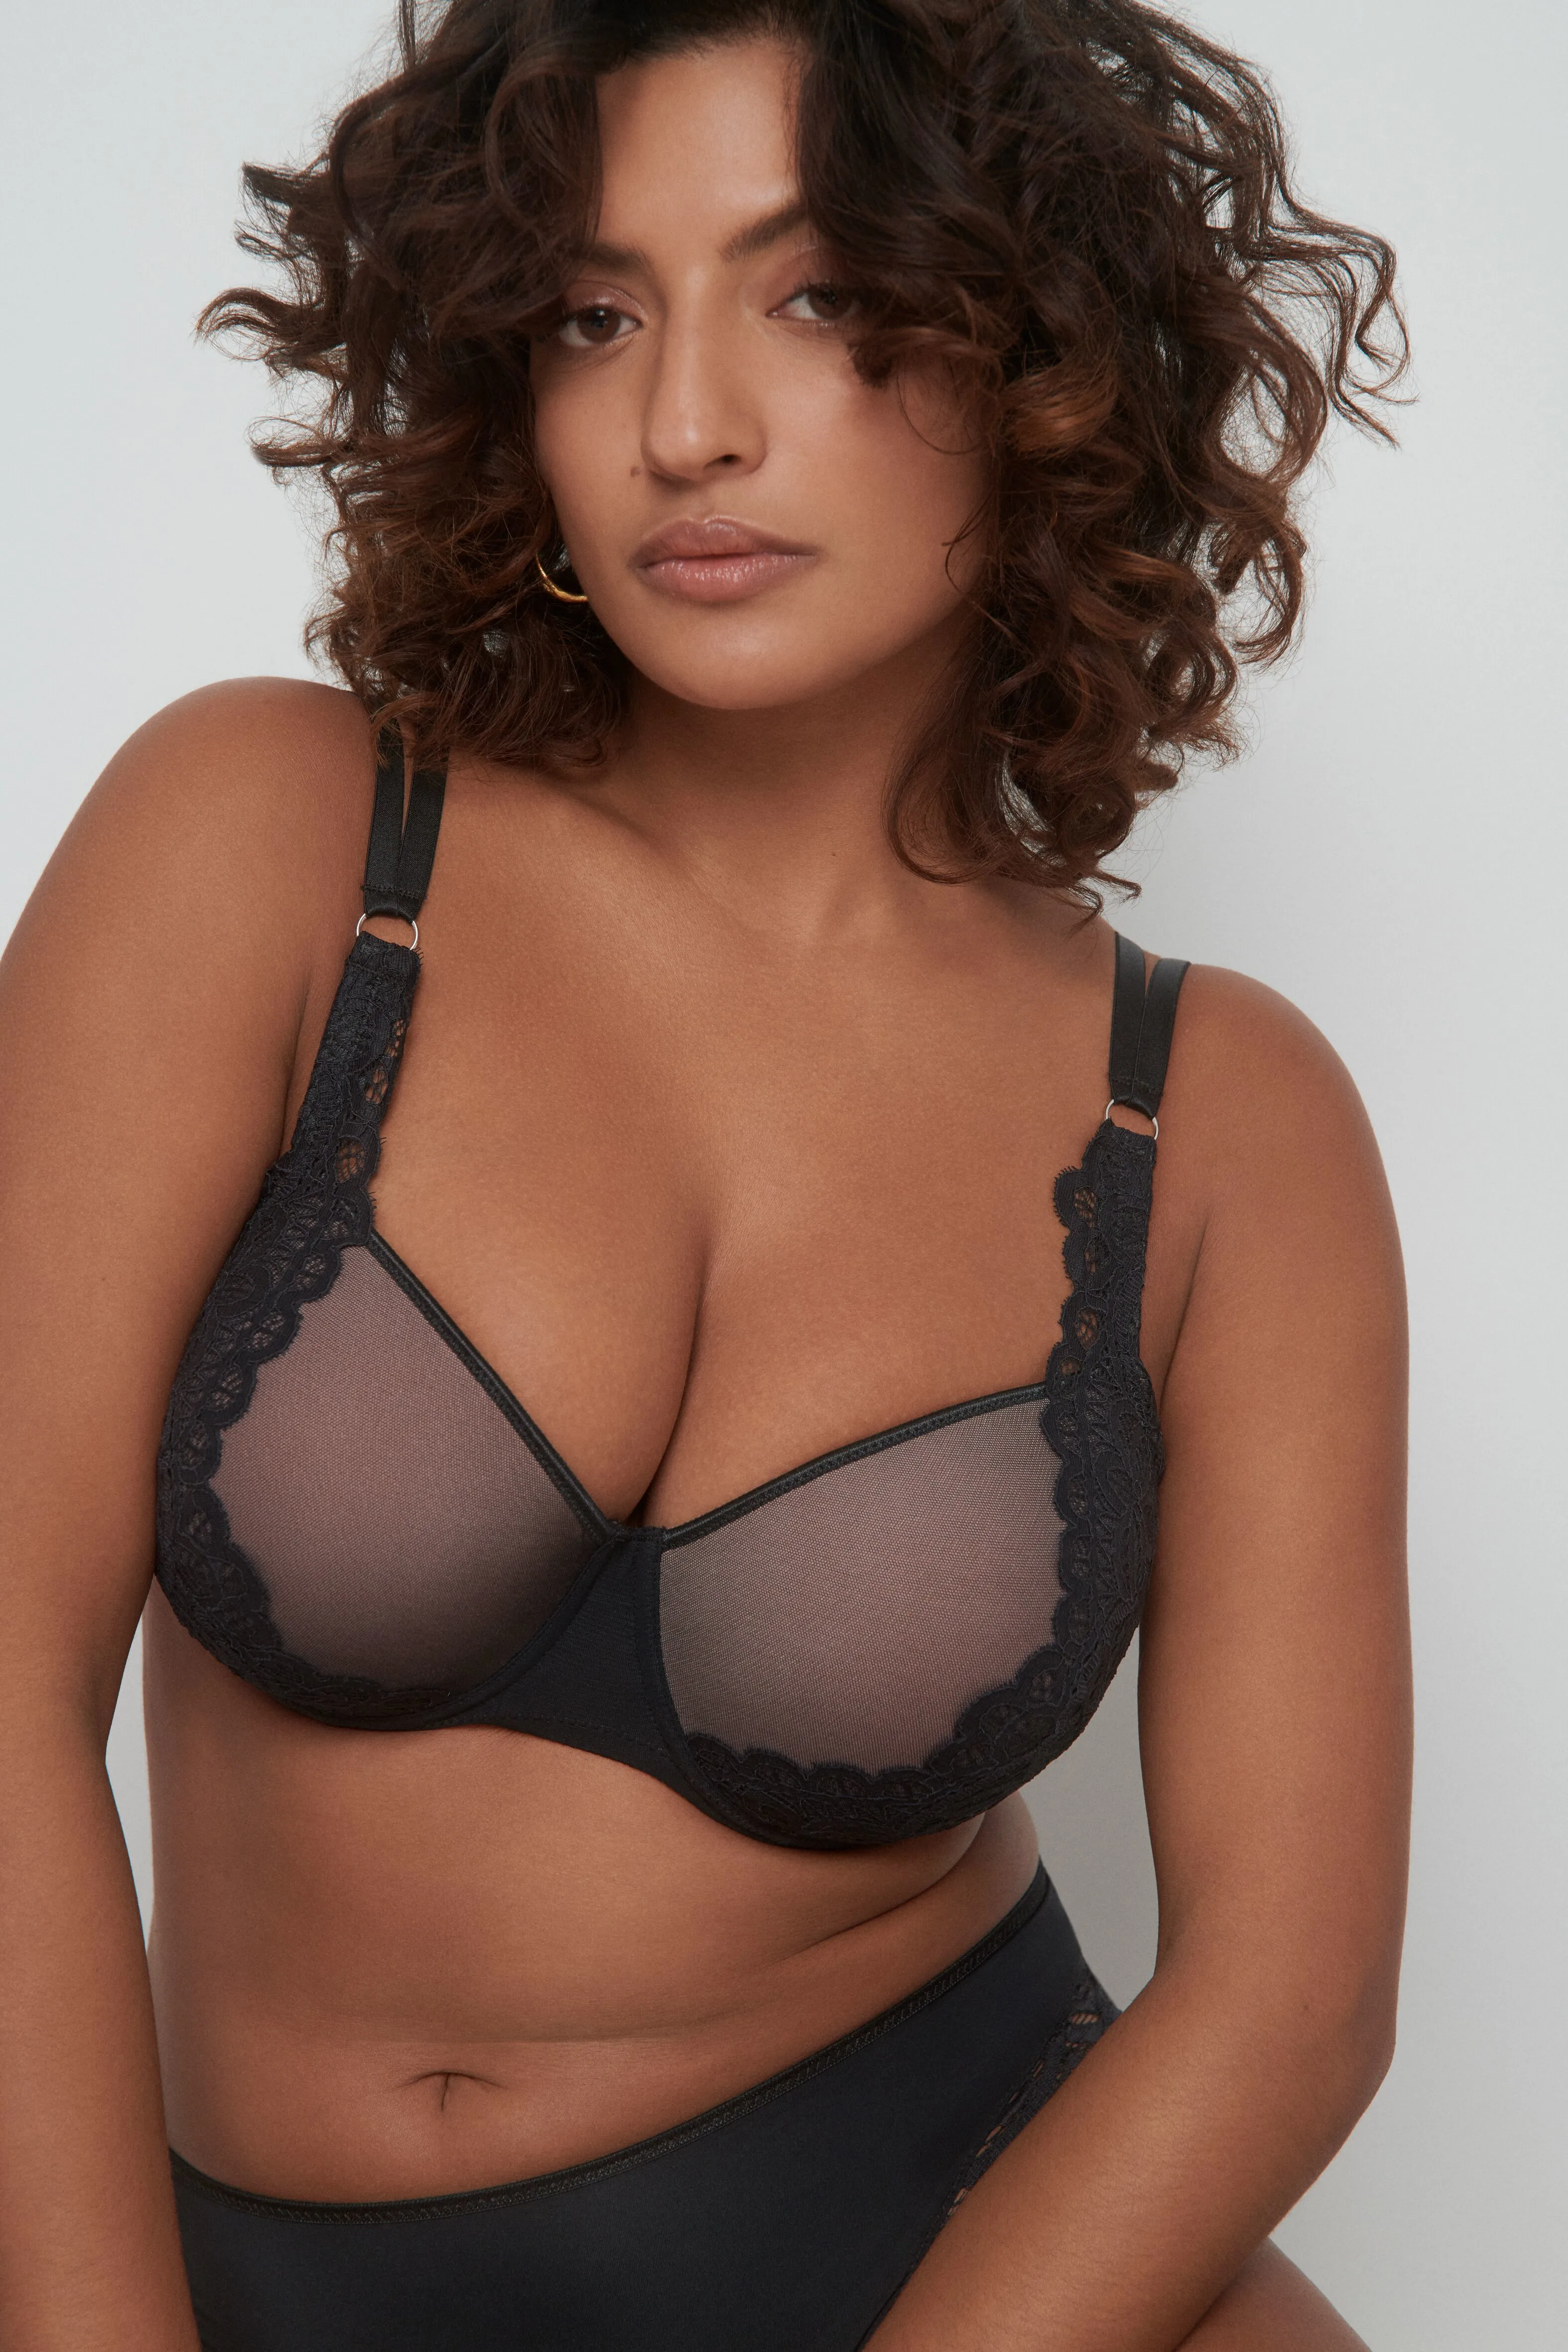 French, European, or American bra sizing: What's the difference?